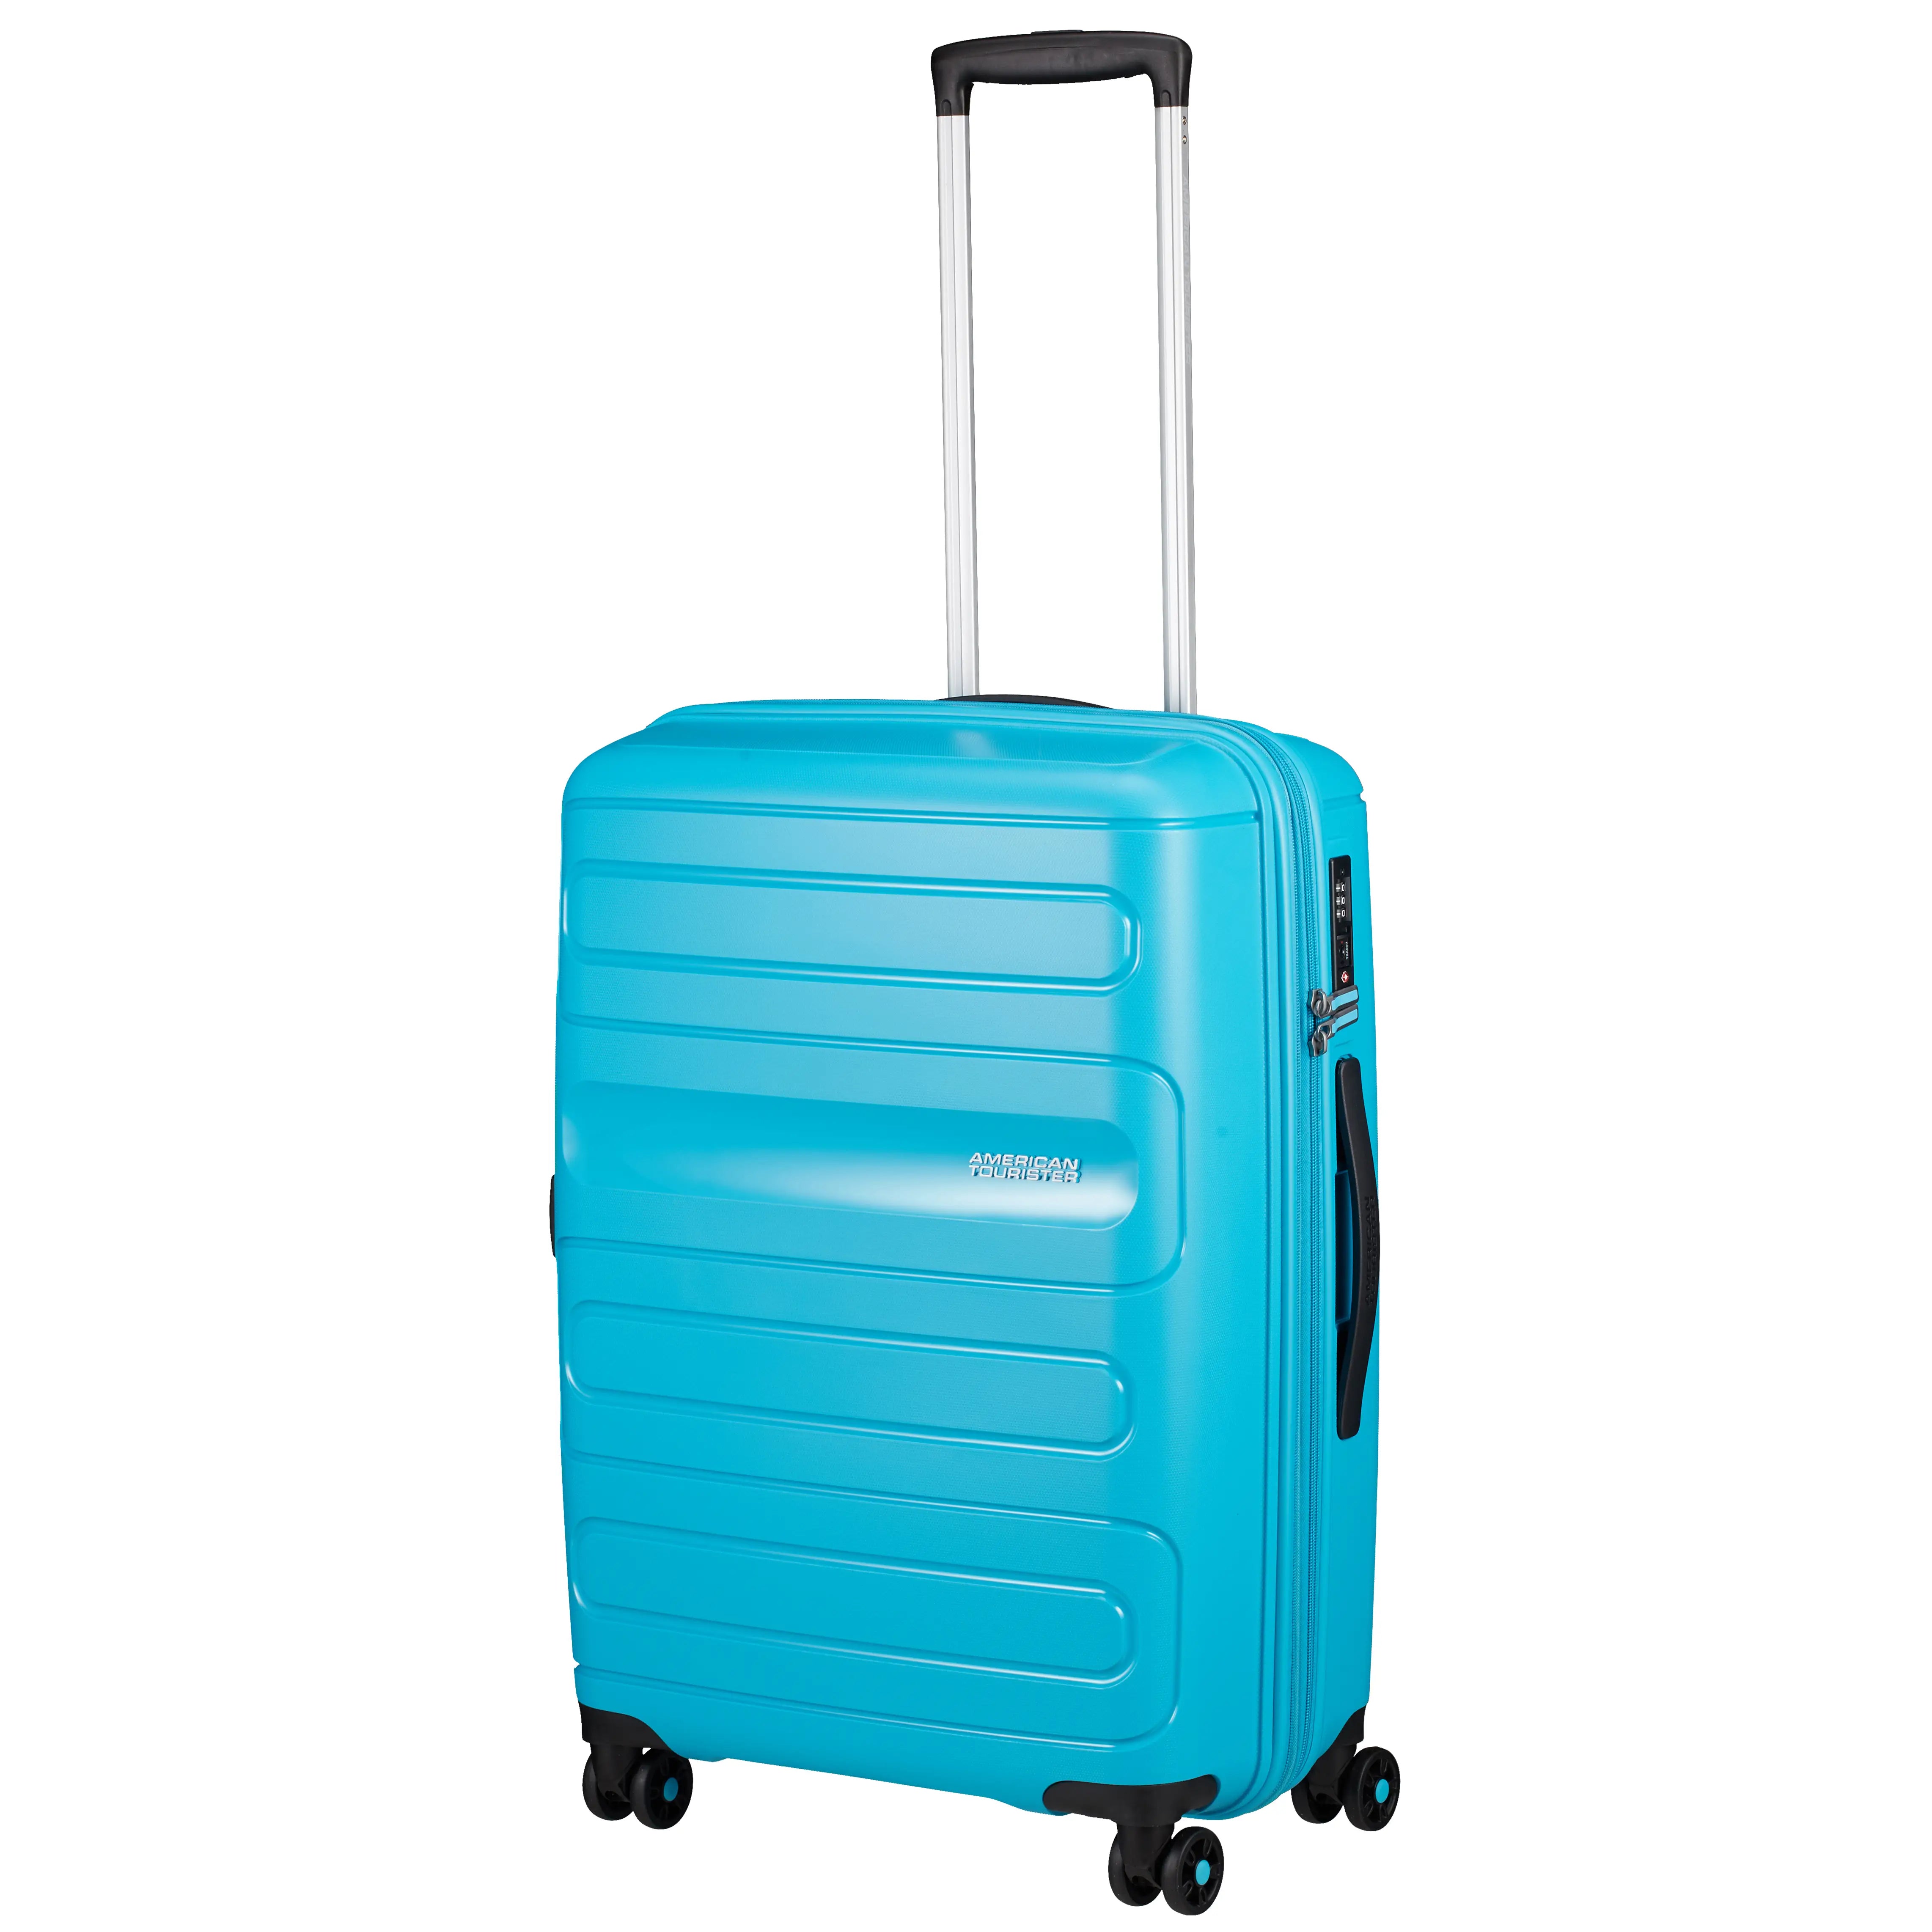 American Tourister Sunside 4-wheel trolley 68 cm - Totally Teal